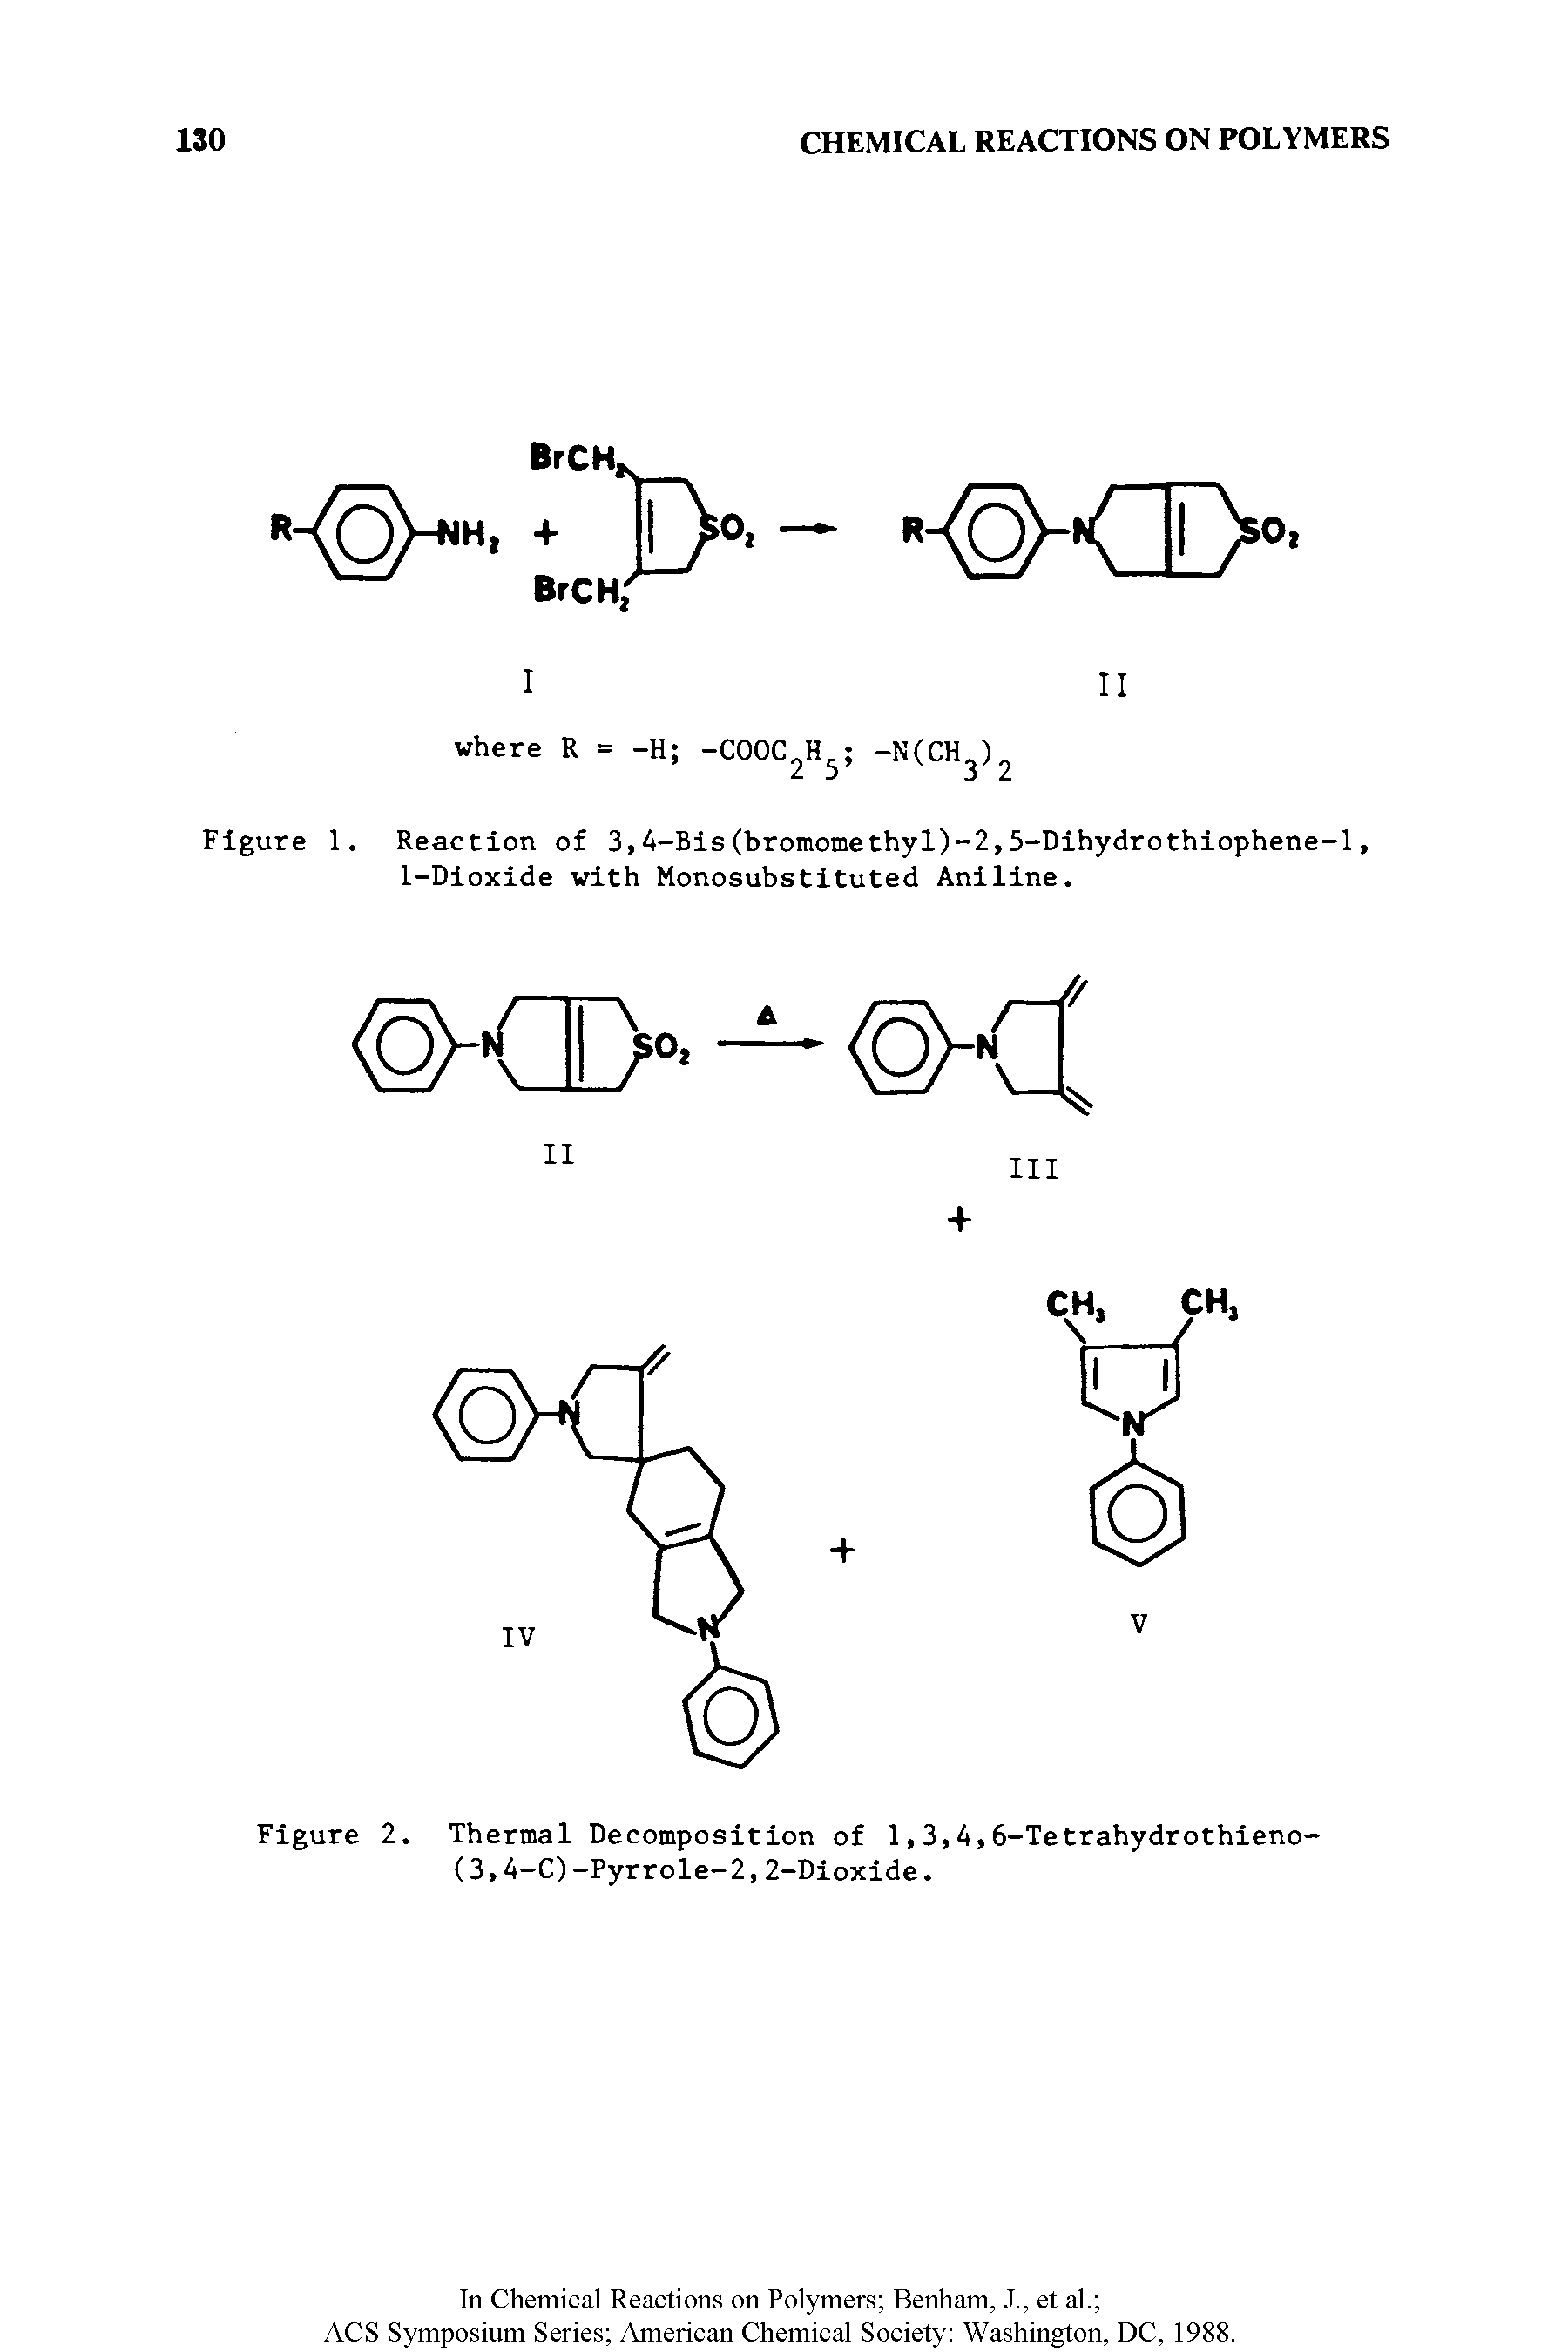 Figure 1. Reaction of 3,4-Bis(bromomethyl)-2,5-Dihydrothiophene-l, i-Dioxide with Monosubstituted Aniline.